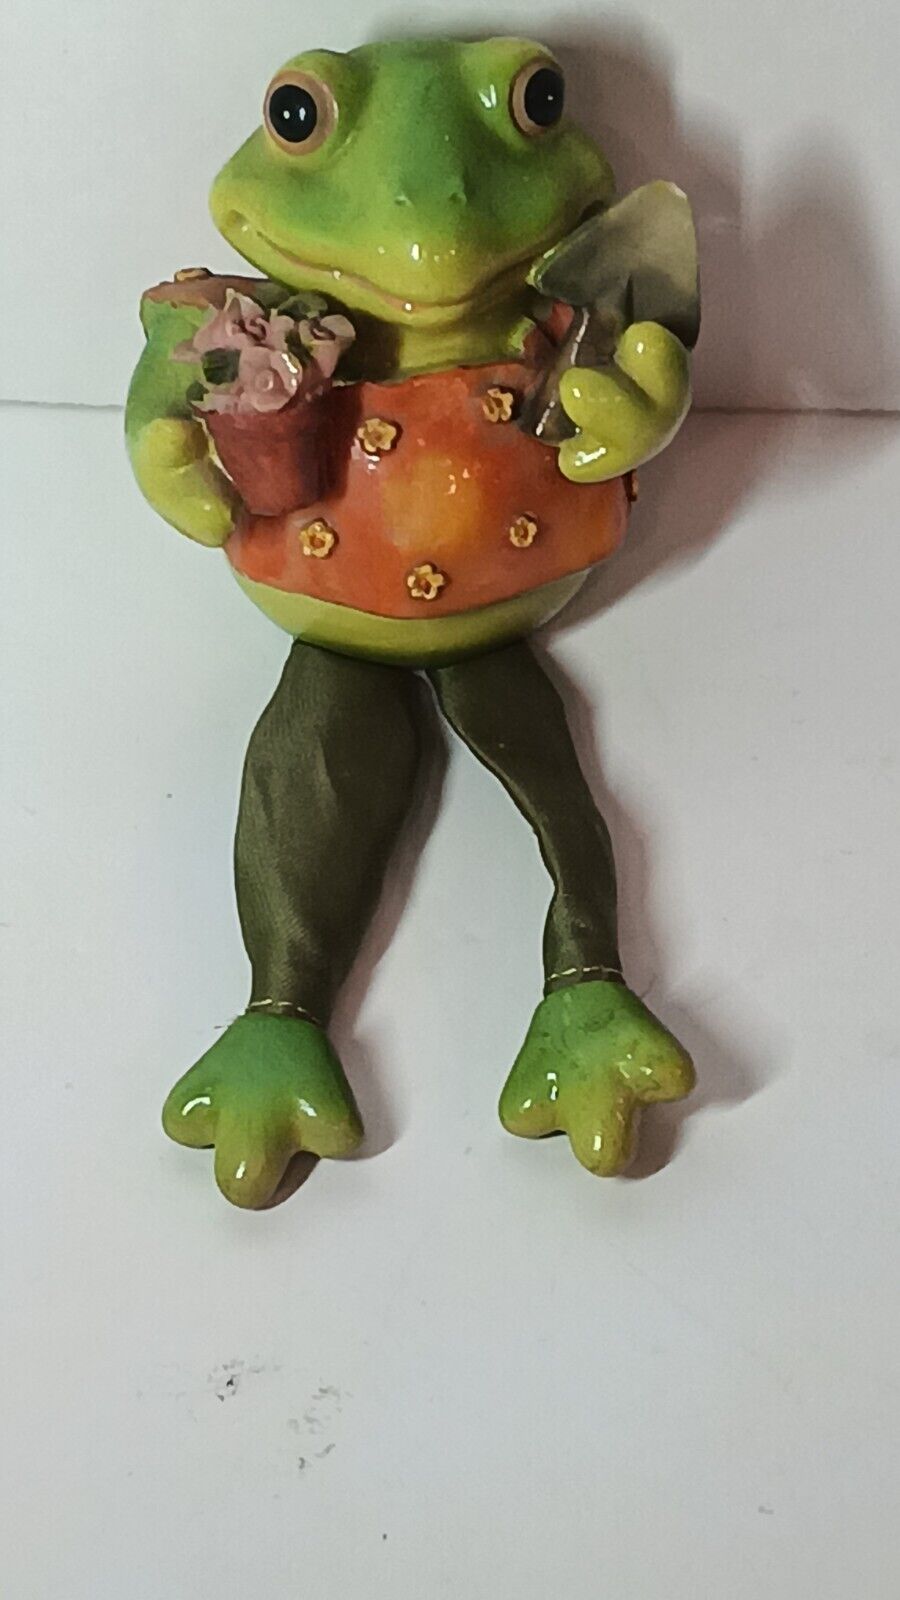 Vintage Ceramic Shelf Frog with Dangling Cloth legs 3in